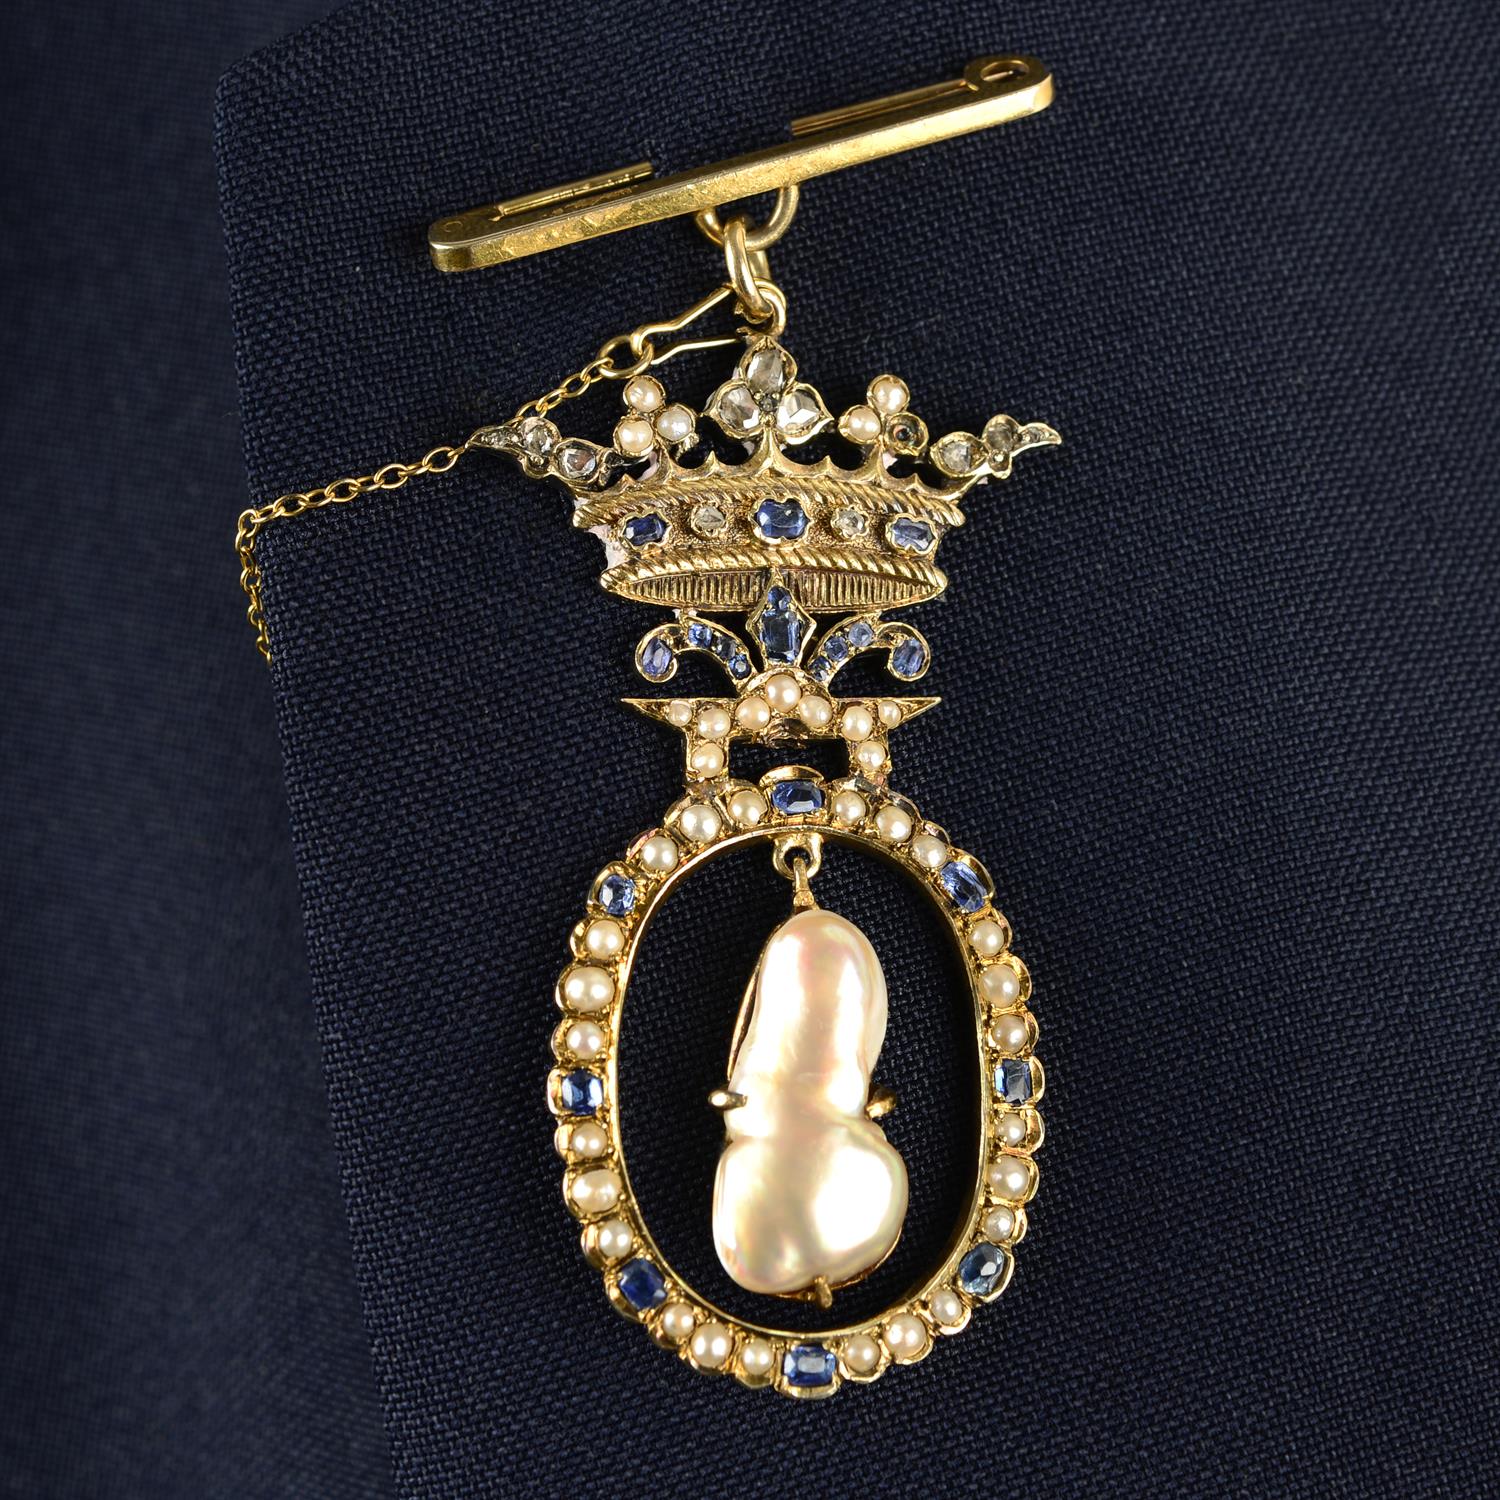 A composite early 20th century gold brooch, the central blister pearl, suspended within a split